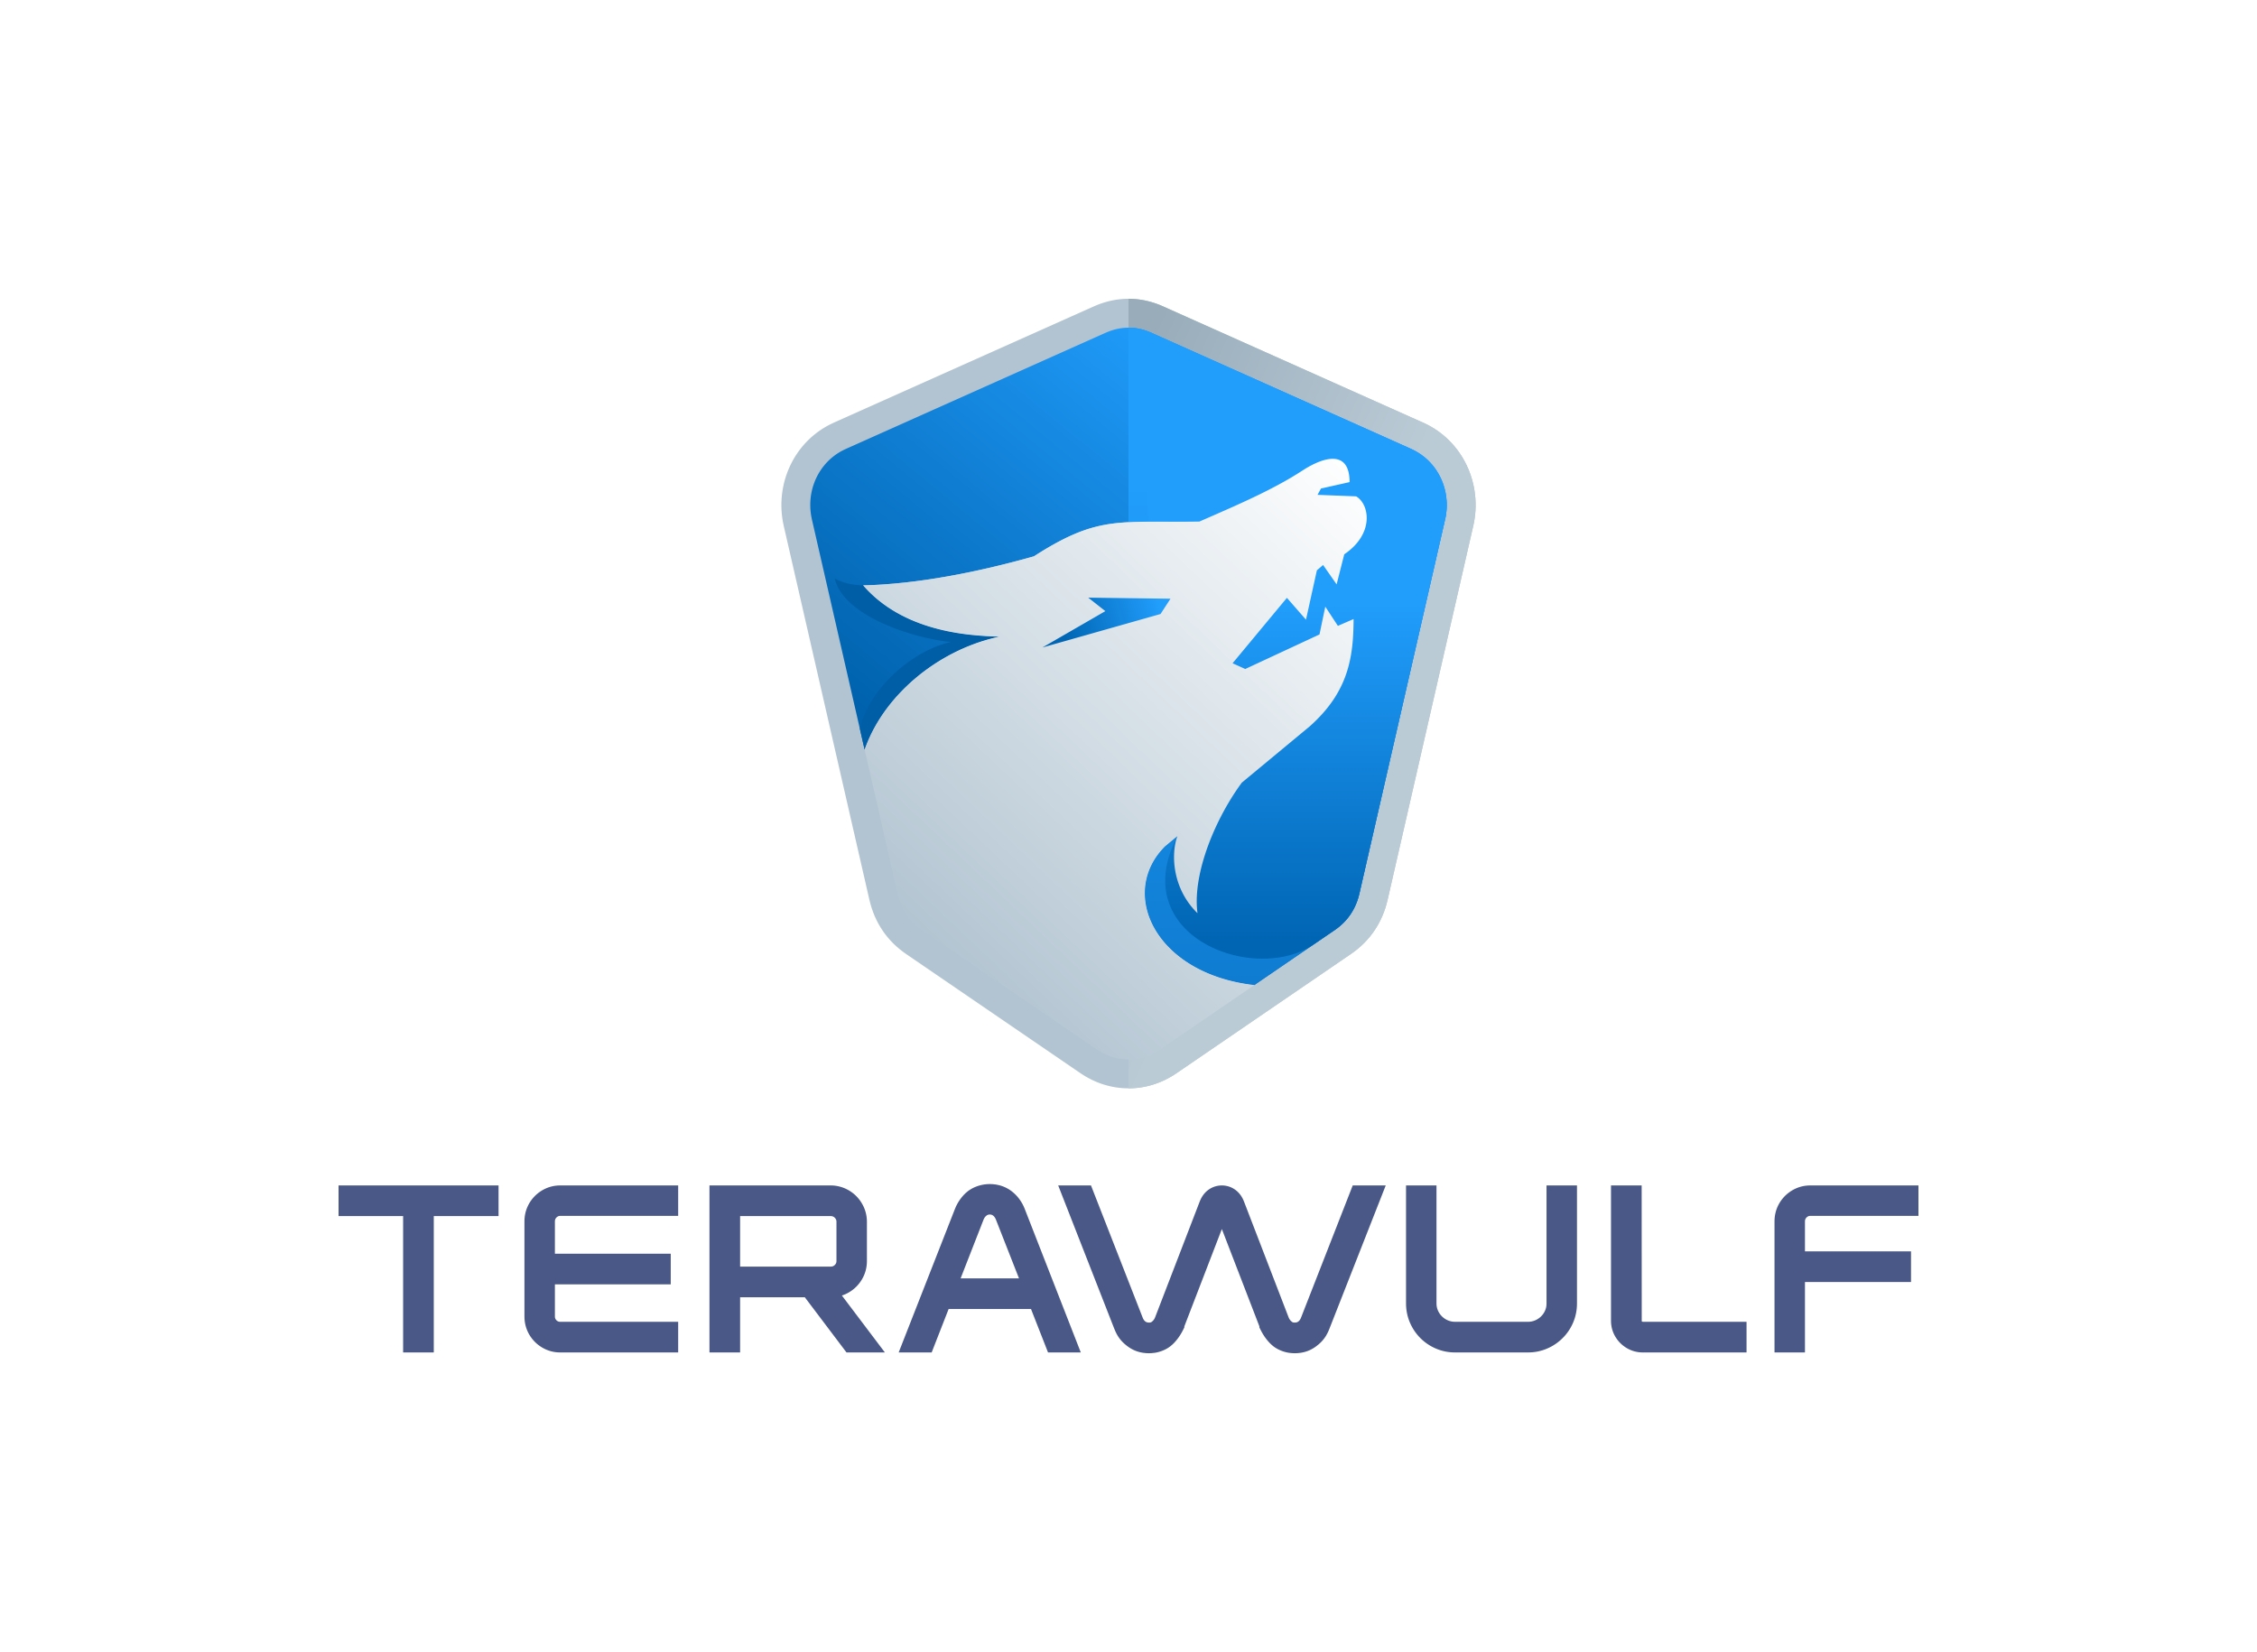 TeraWulf Announces Appointment of New Independent Directors to the Board